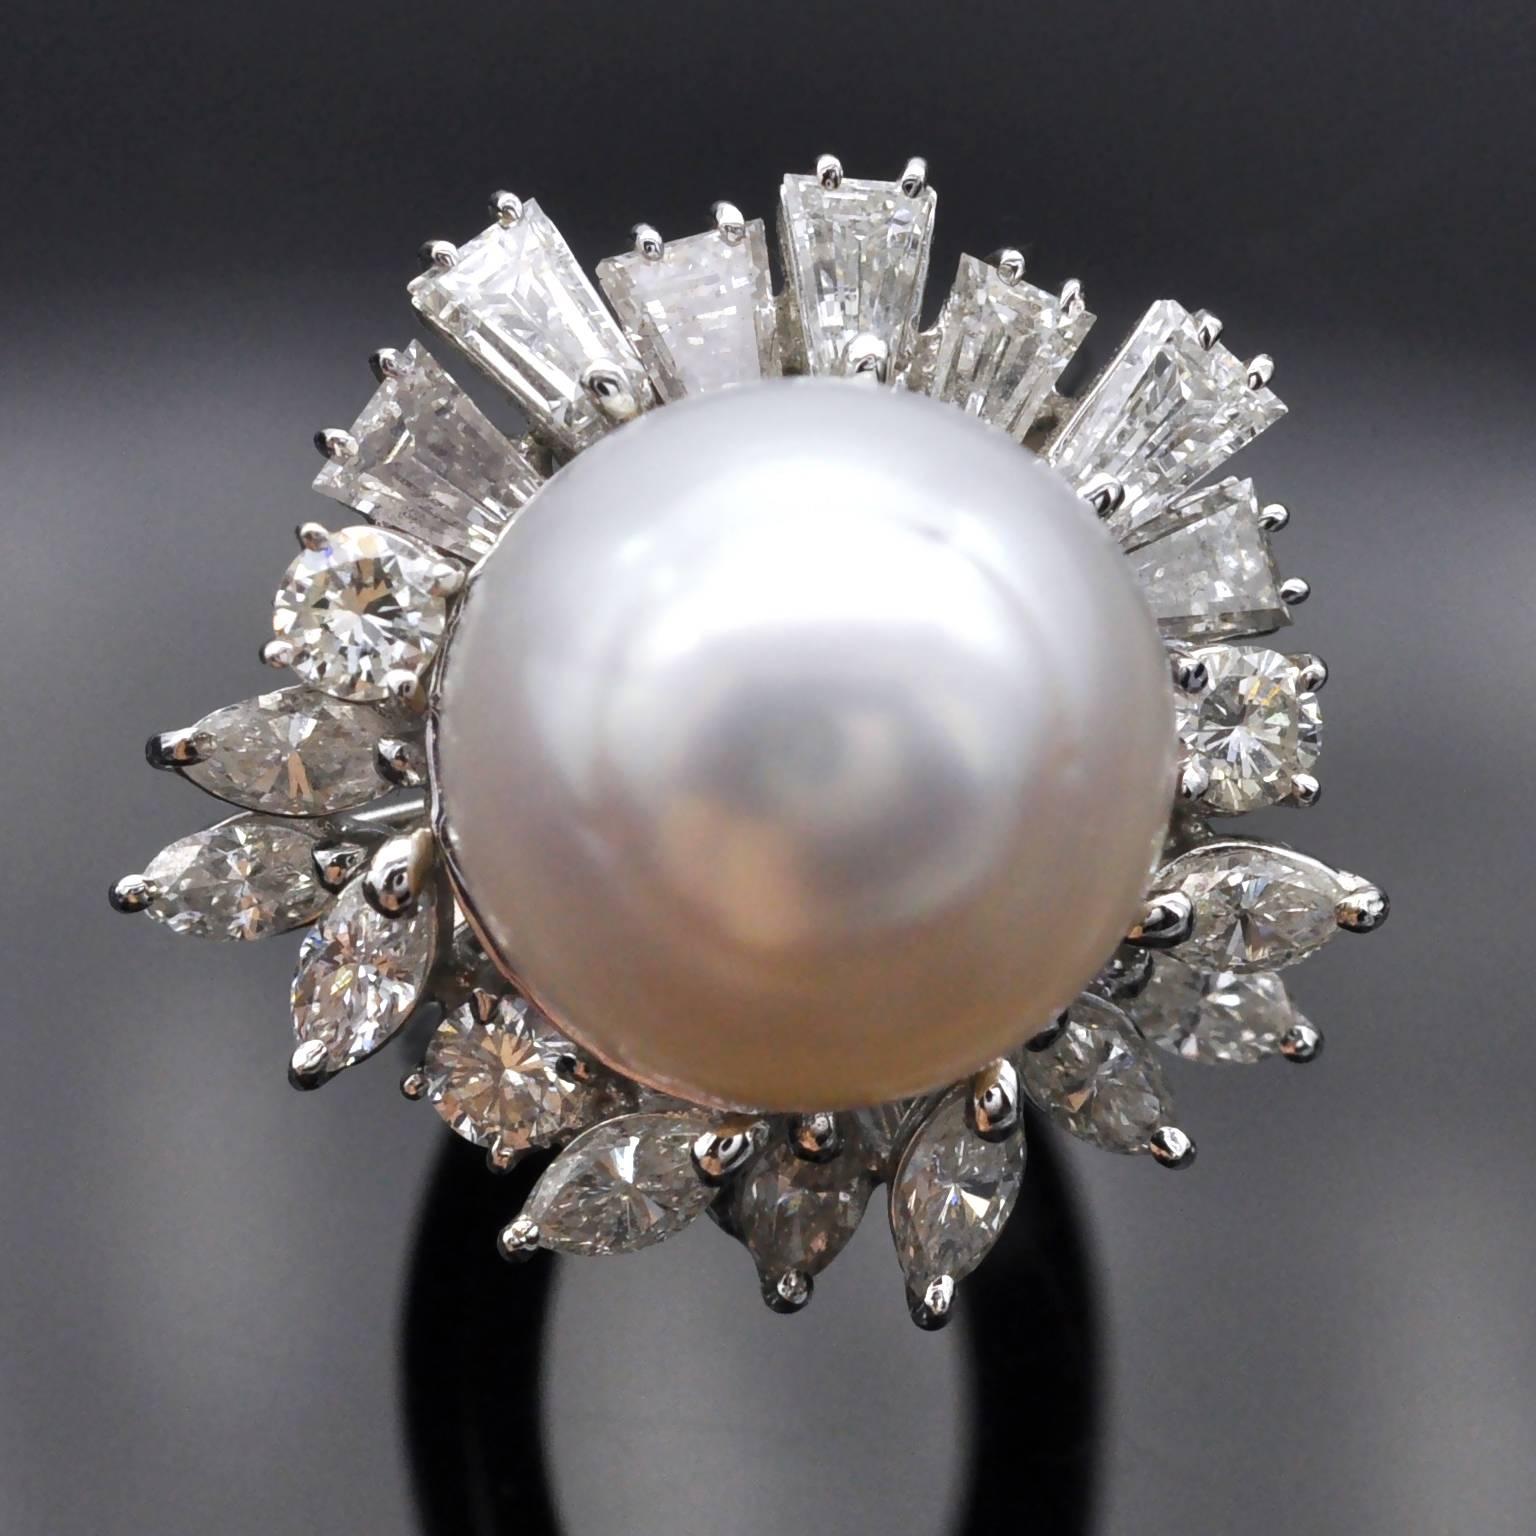 Important pearl ring. This alluring cocktail ring measuring 22 mm is composed by a 13.7mm lustrous white south-sea pearl surrounded by a spray of marquise, round and tapered diamonds . 
The diamonds weigh approximately 1.70 carats, graded G-H color